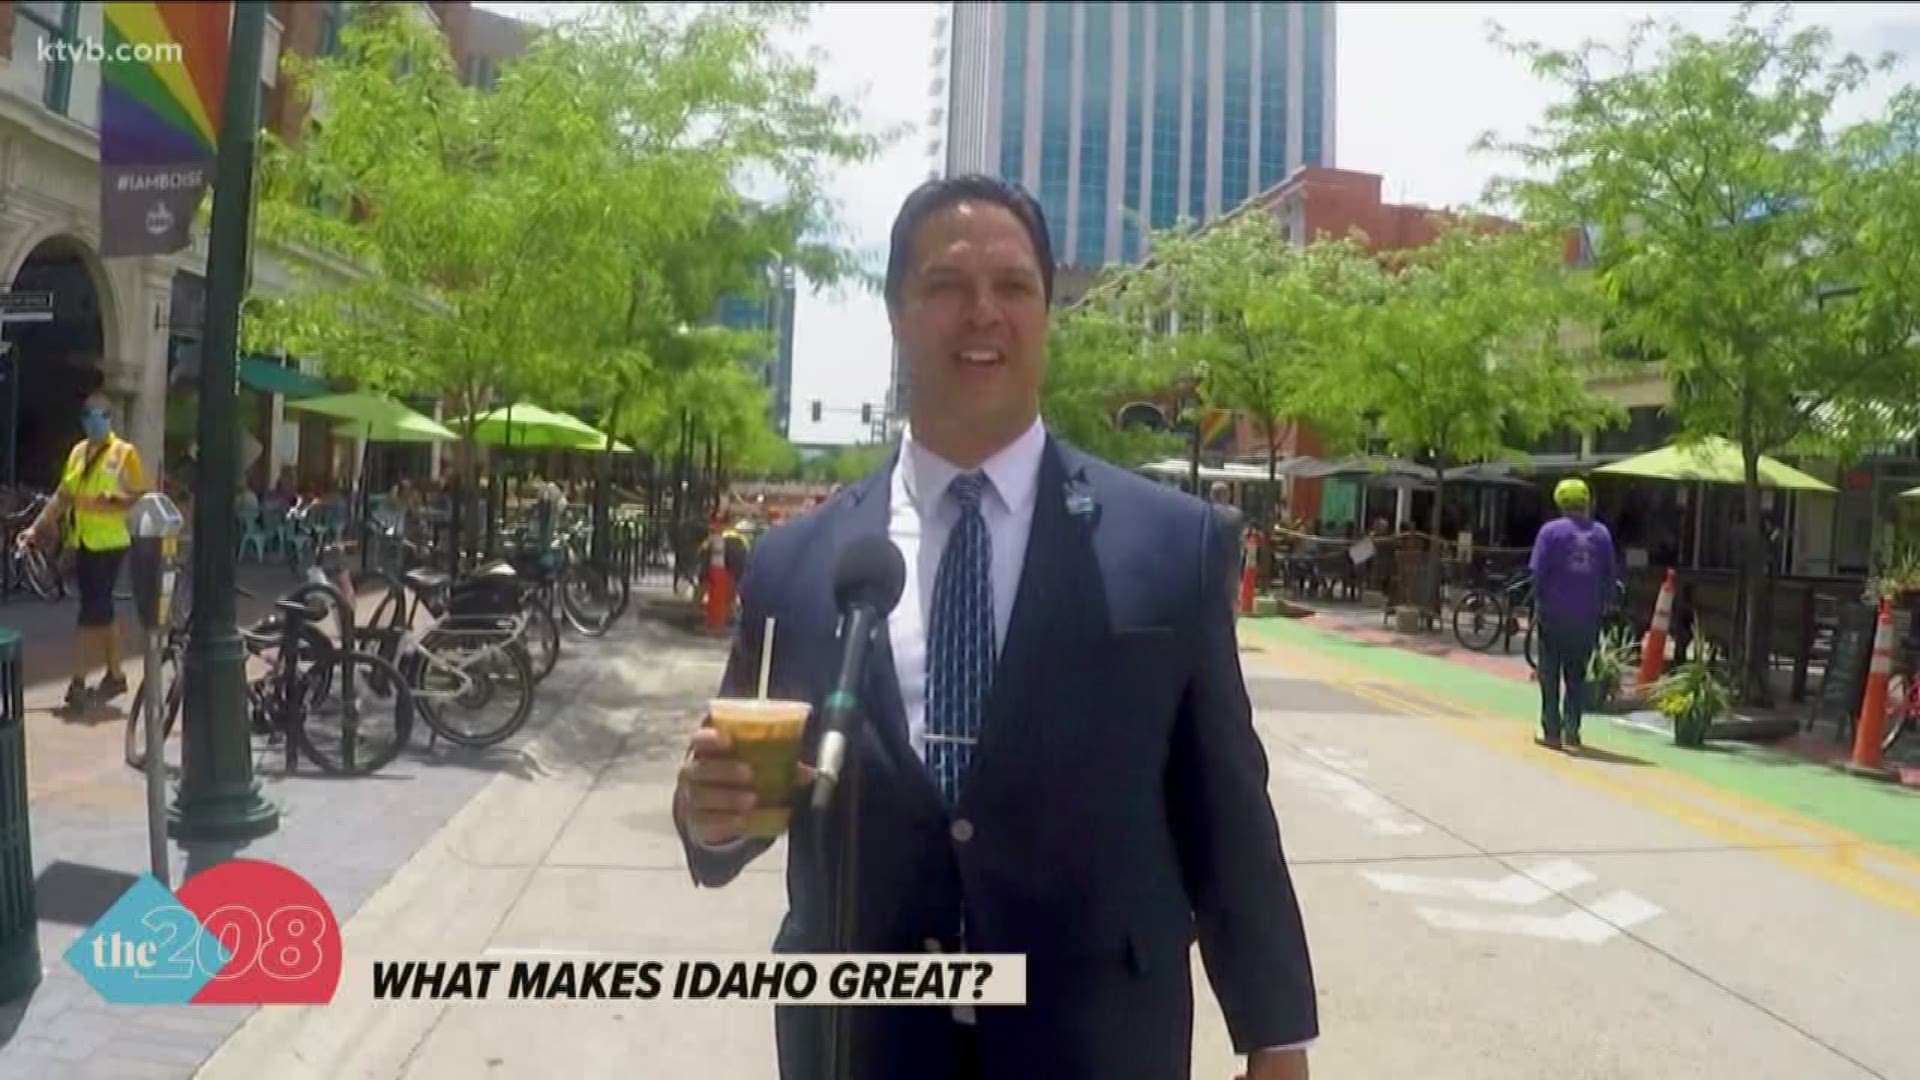 We asked people in downtown Boise what makes Idaho great, and got plenty of answers.